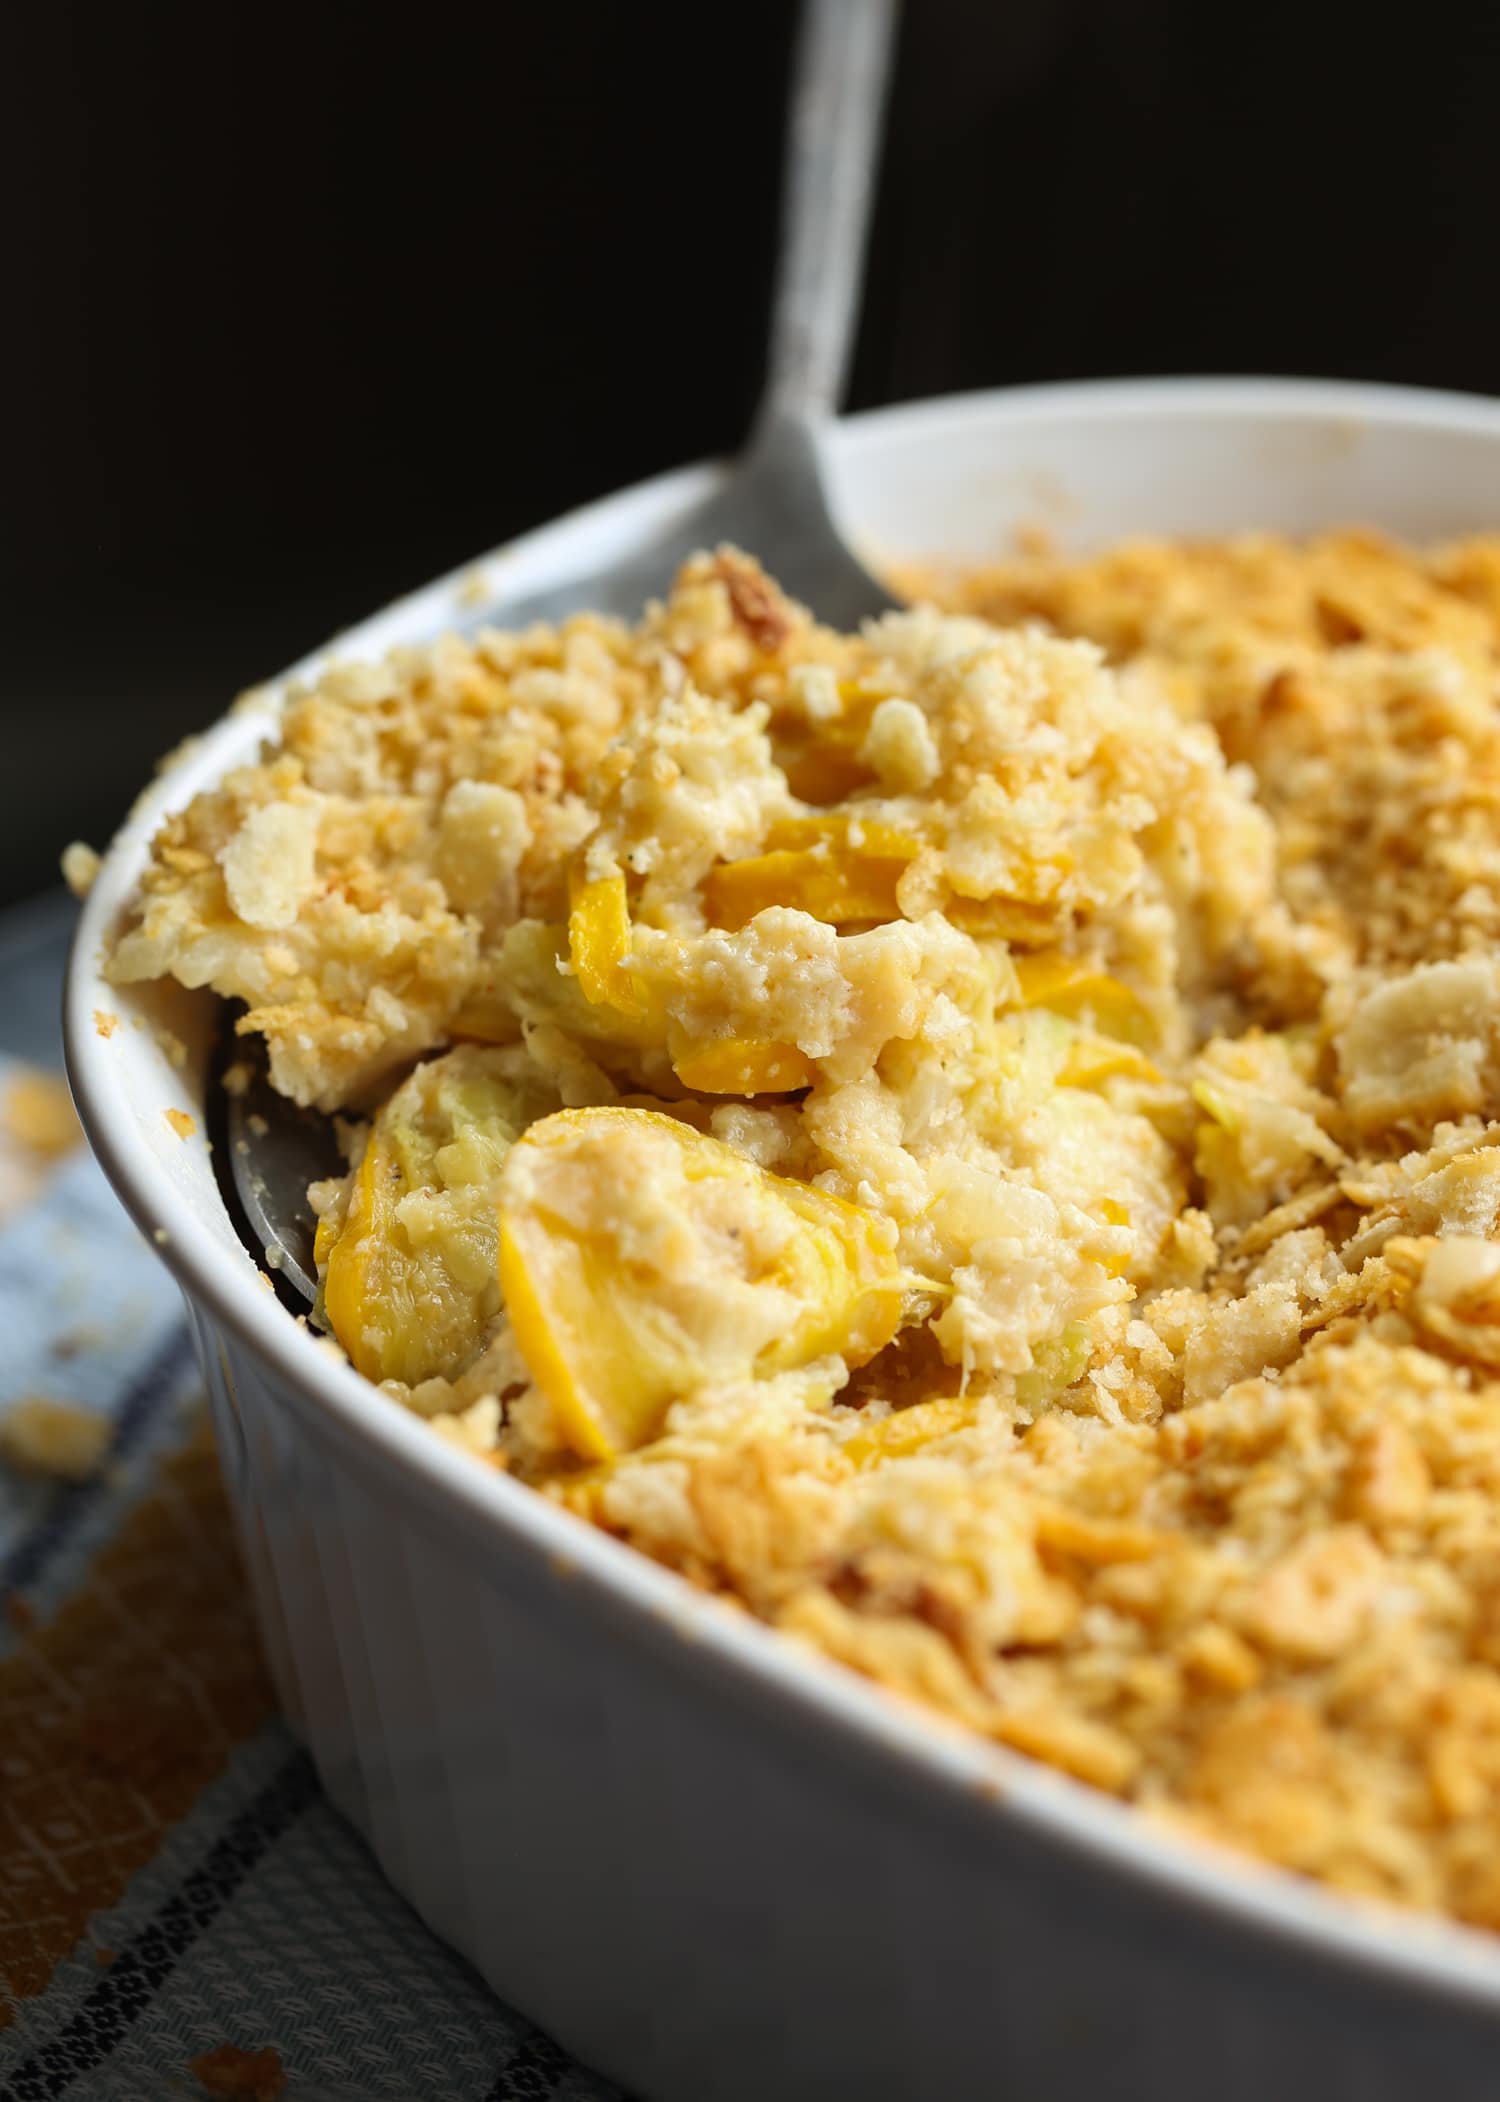 Creamy squash casserole topped with crushed Ritz crackers in a baking dish with a serving spoon.